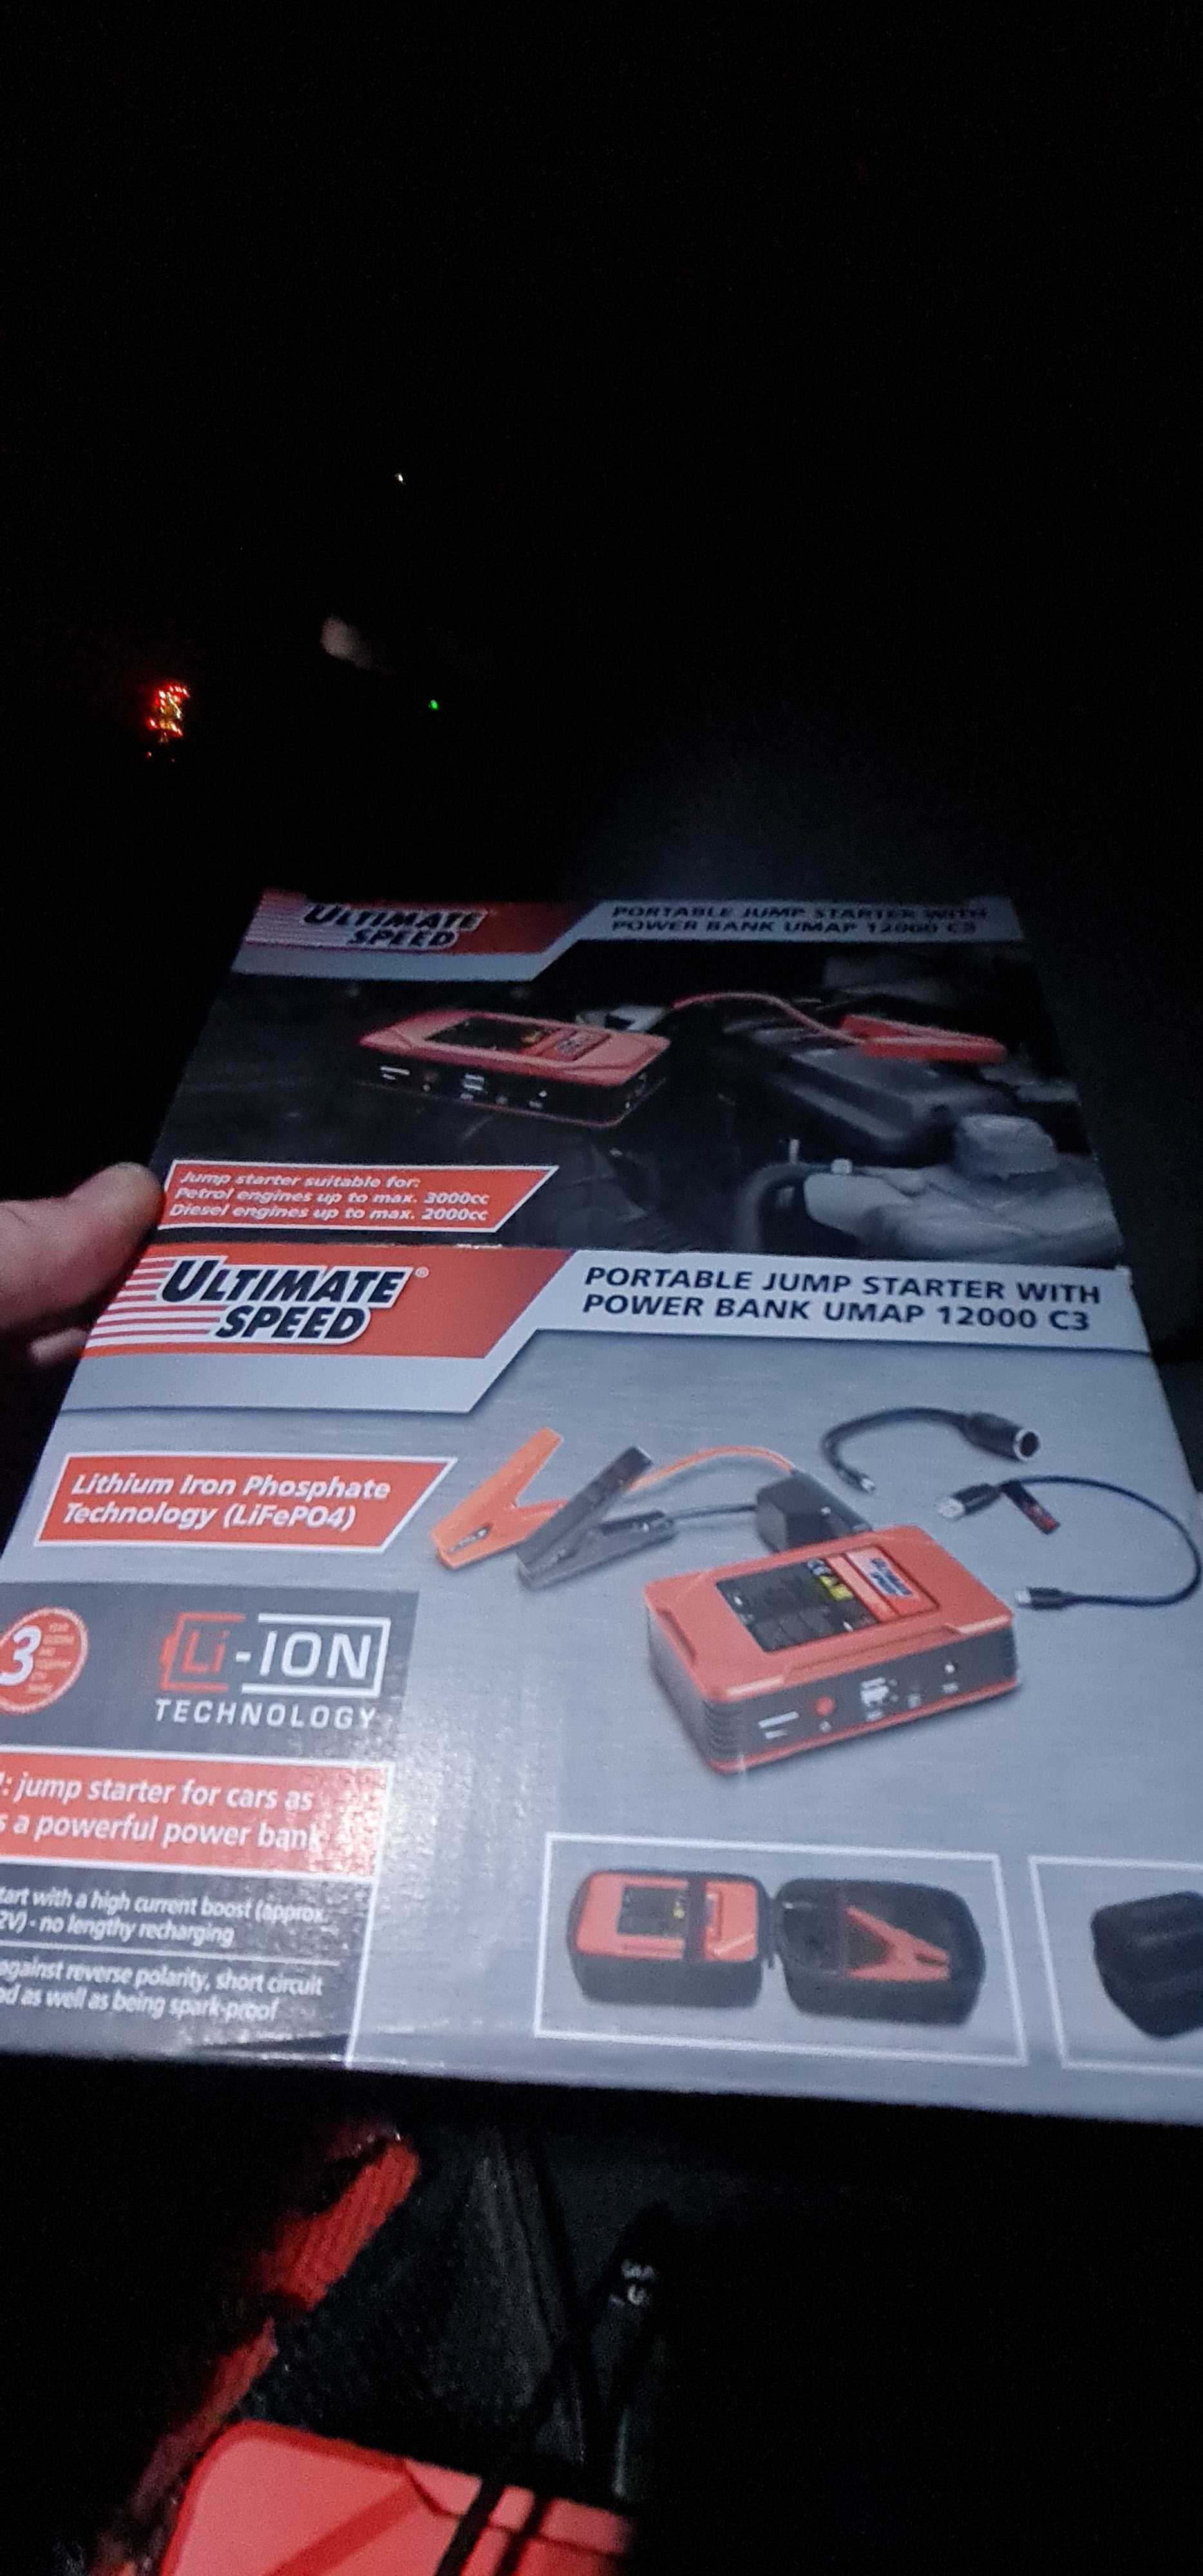 Ultimate speed Portable Jump Starter With Power Bank UMAP 12000 B3